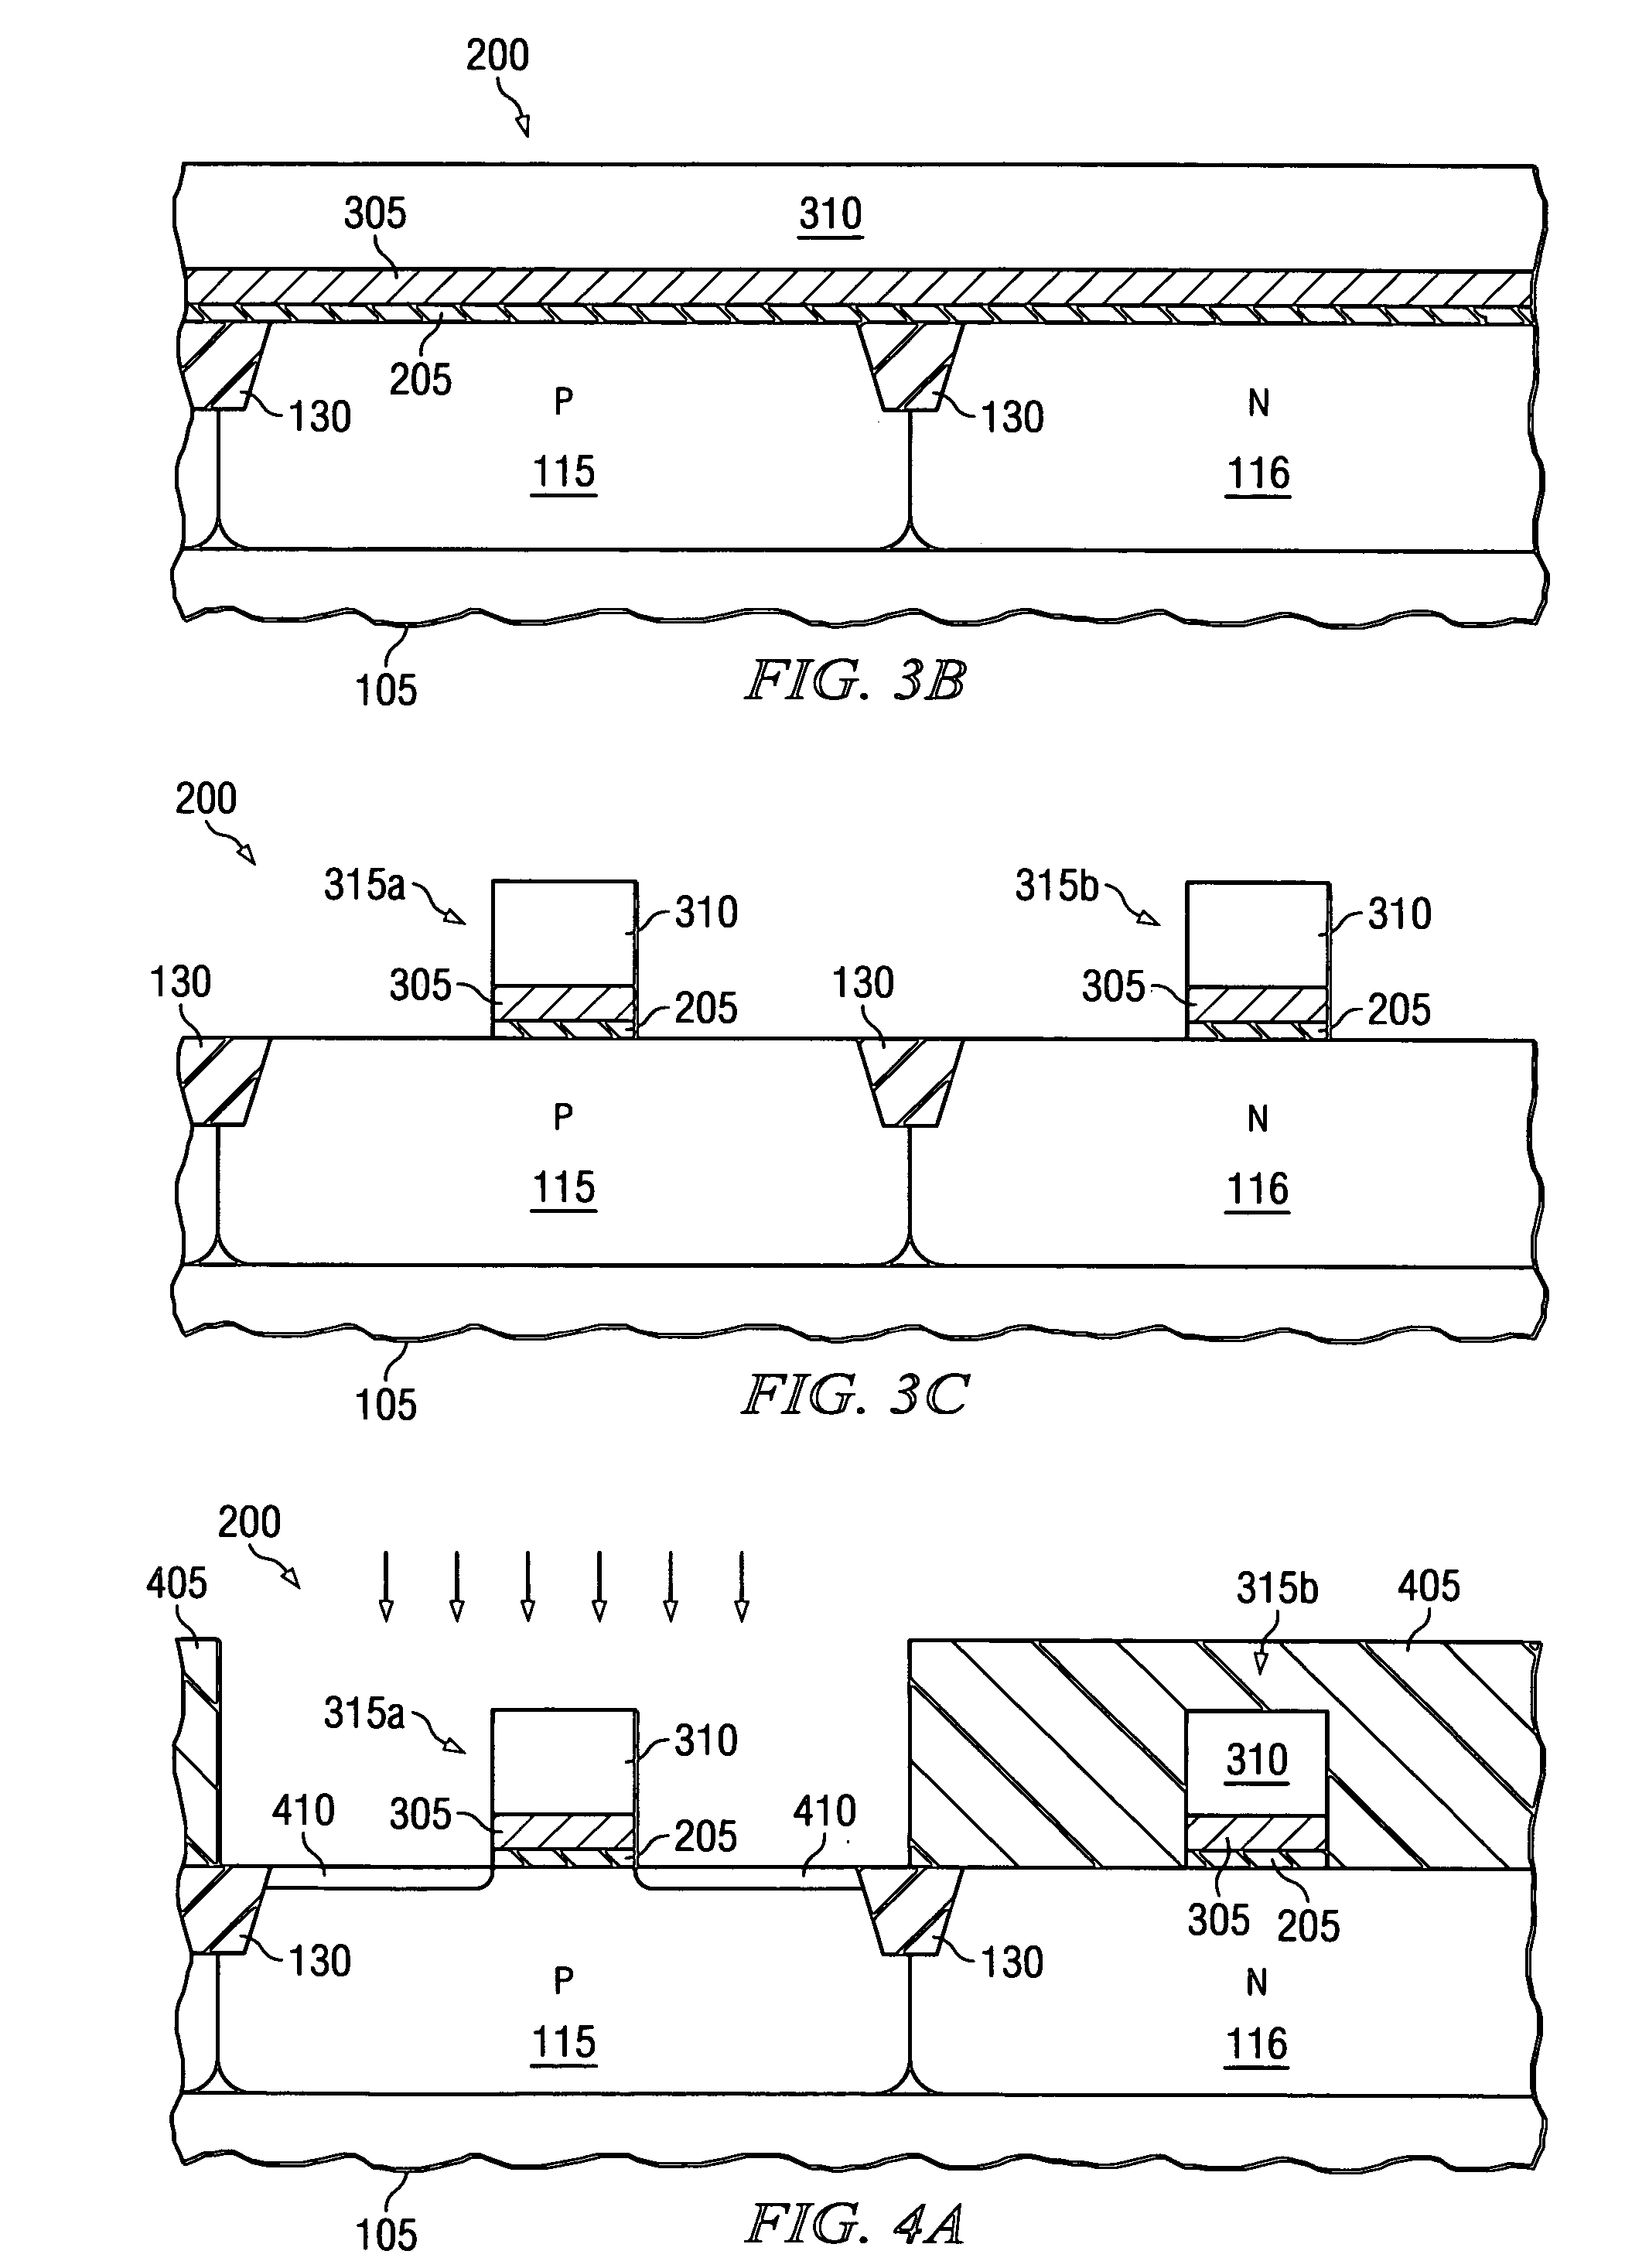 Process for manufacturing dual work function metal gates in a microelectronics device